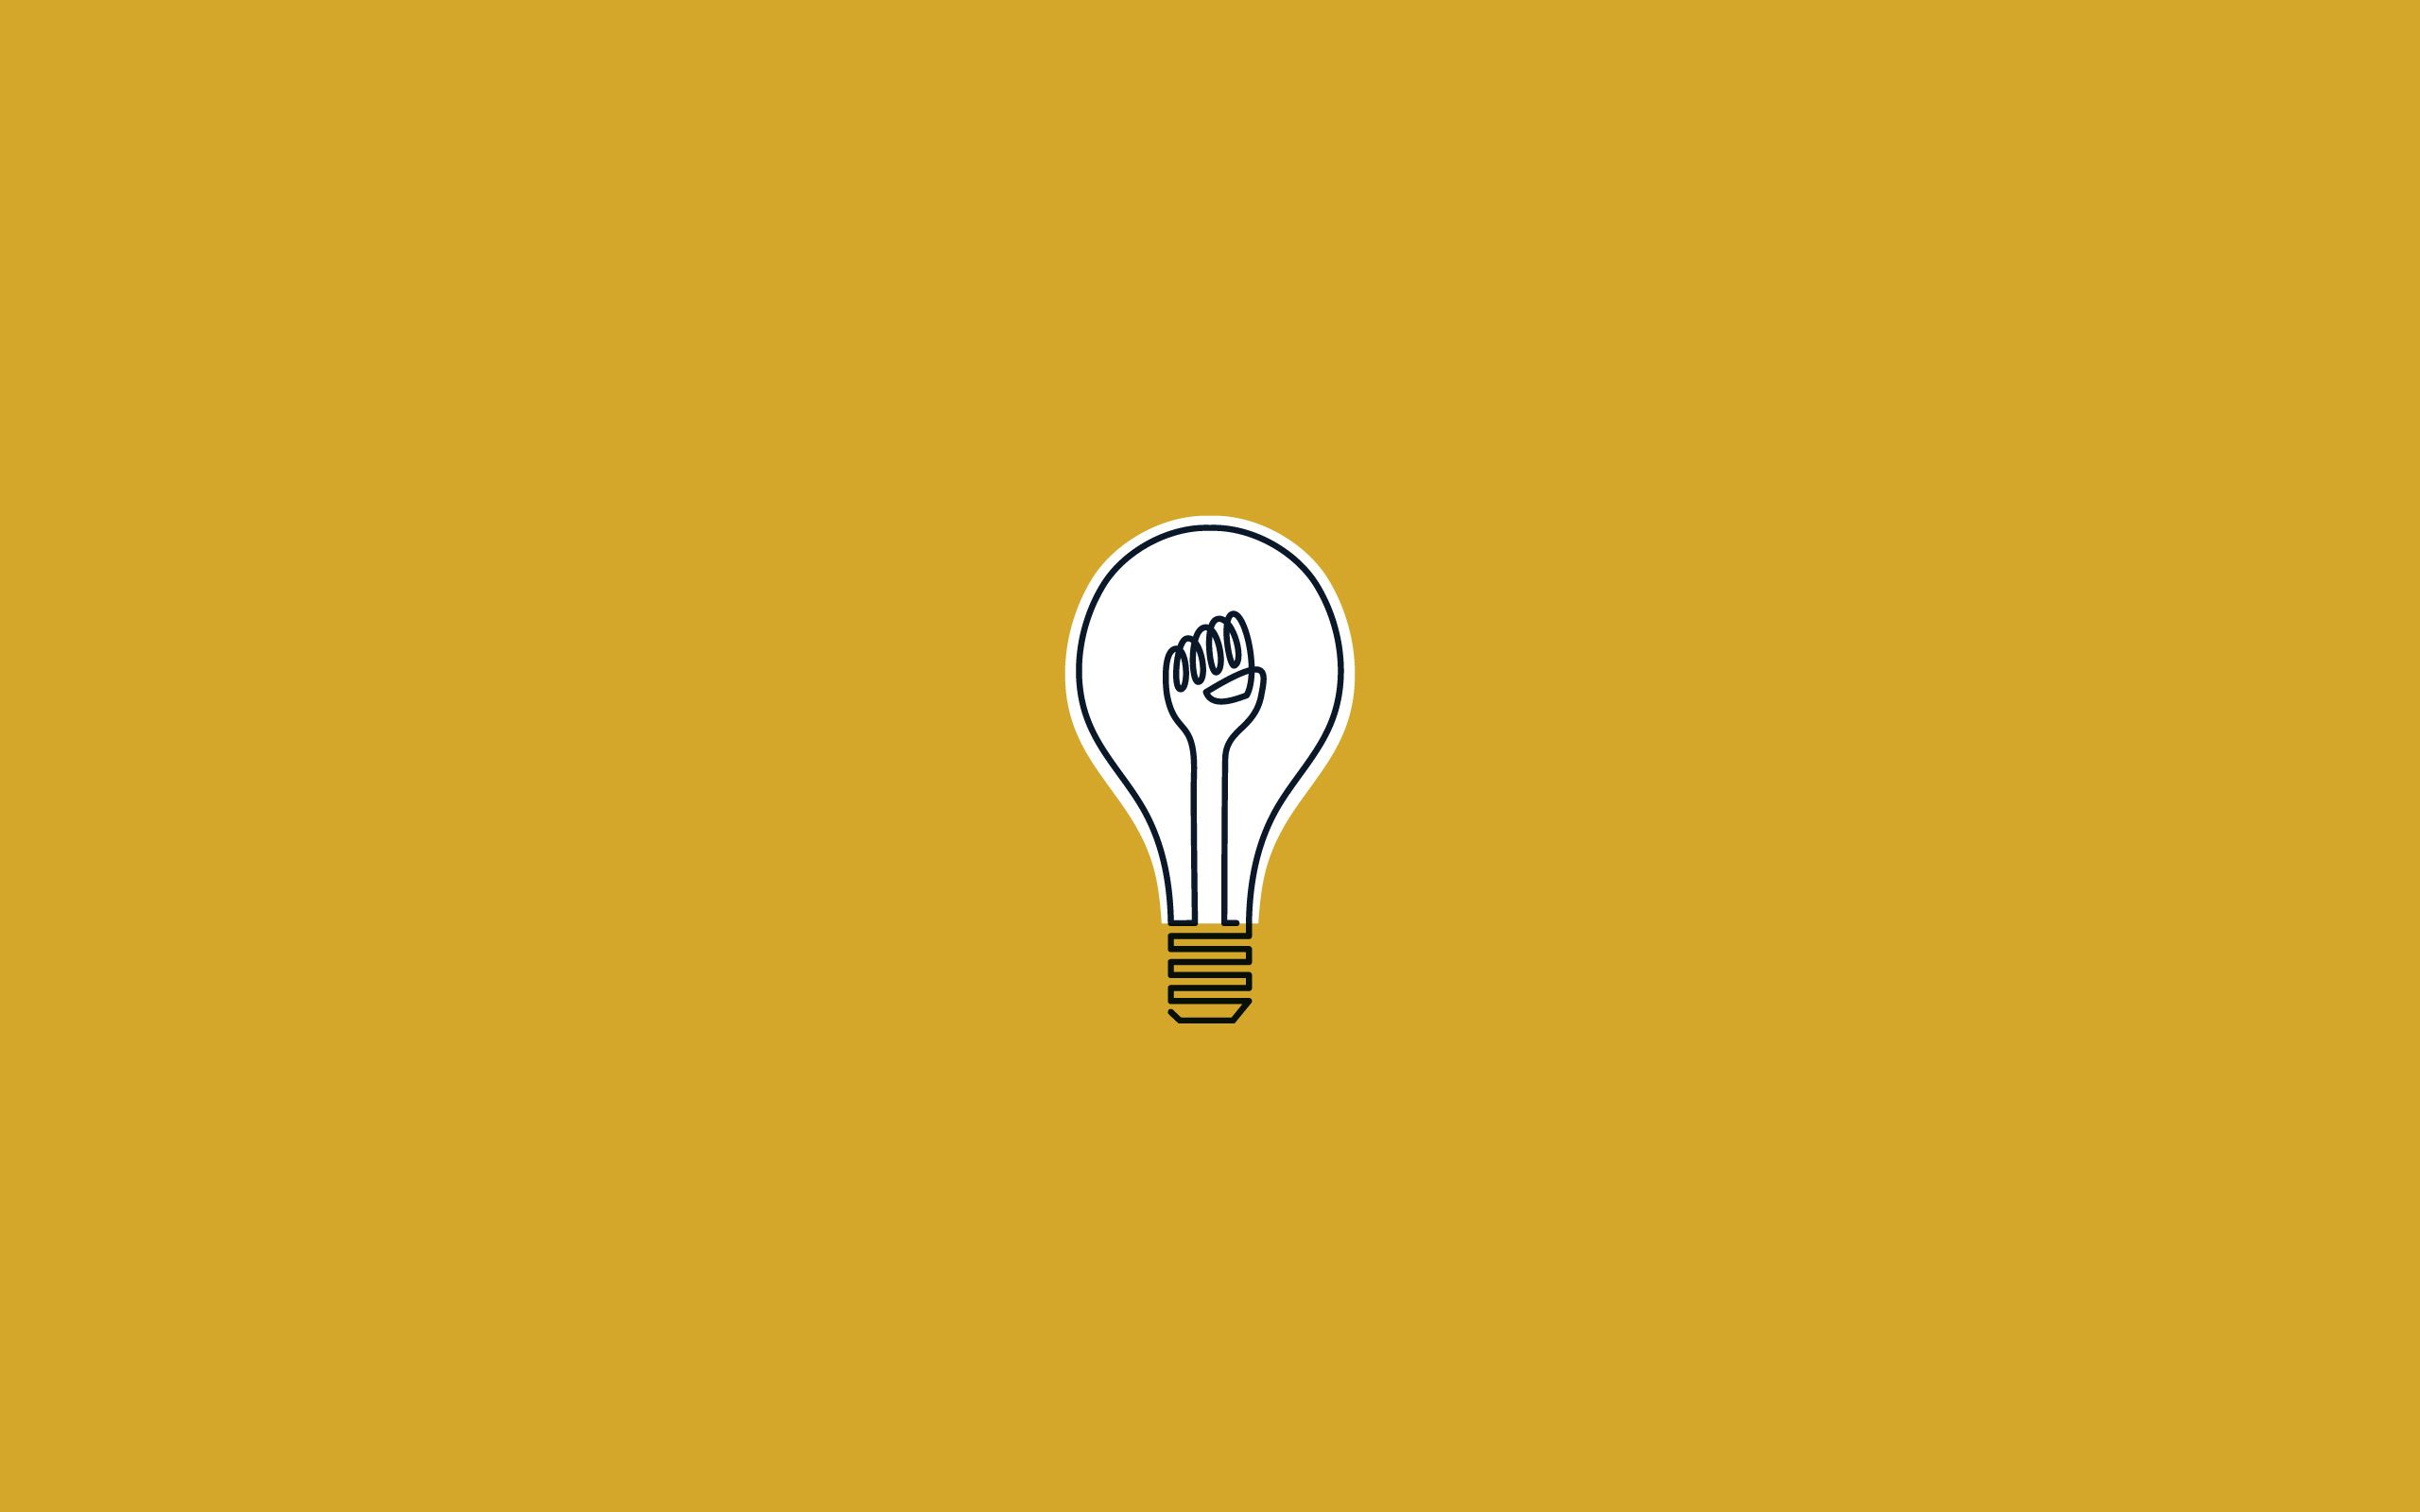 A lightbulb on a yellow background - Light yellow, simple